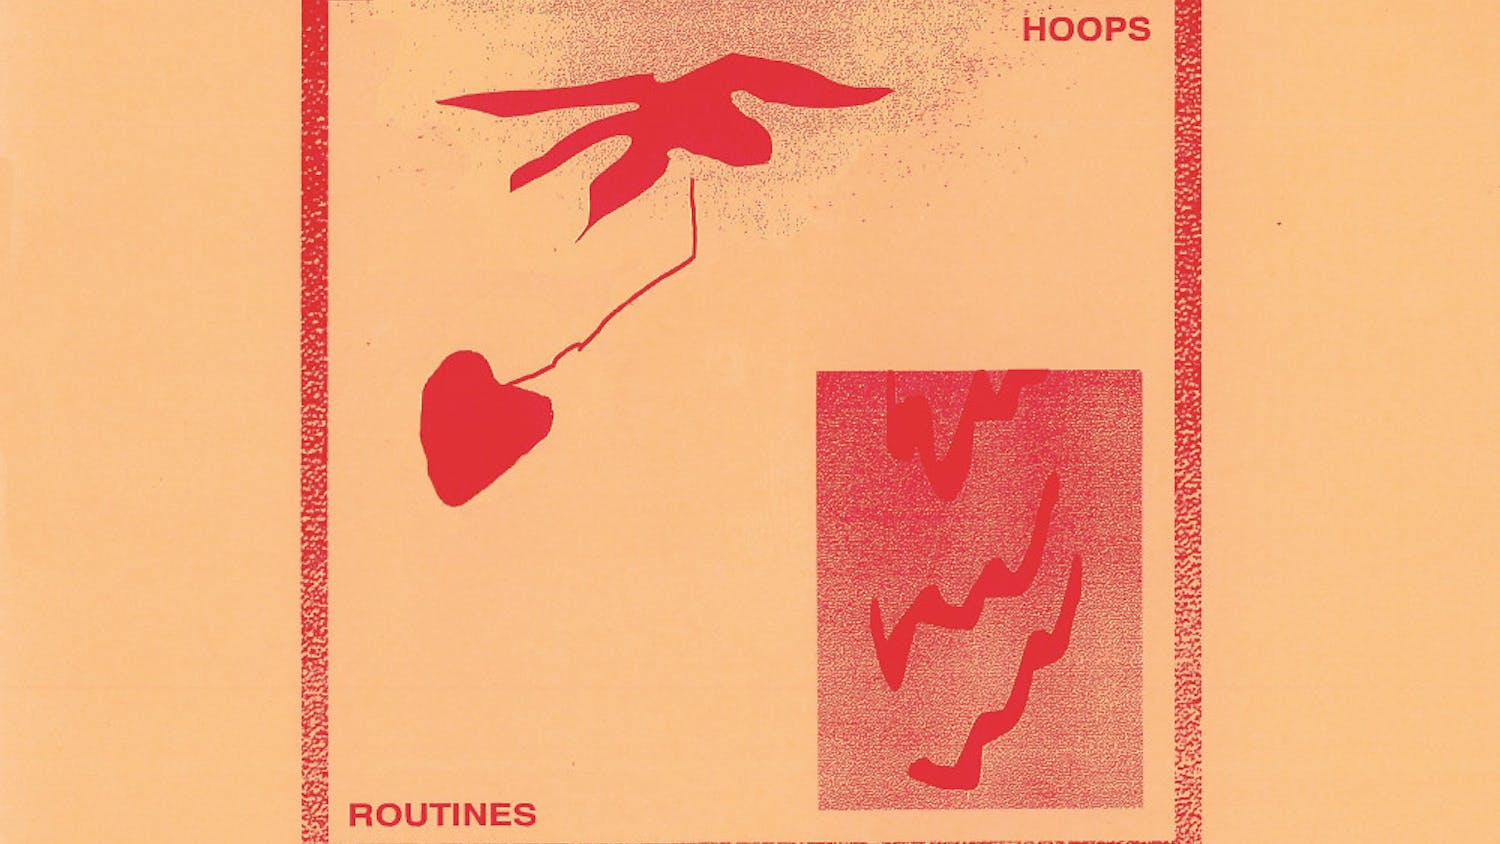 Hoops-Routines-Digital-Cover-SMALL-1